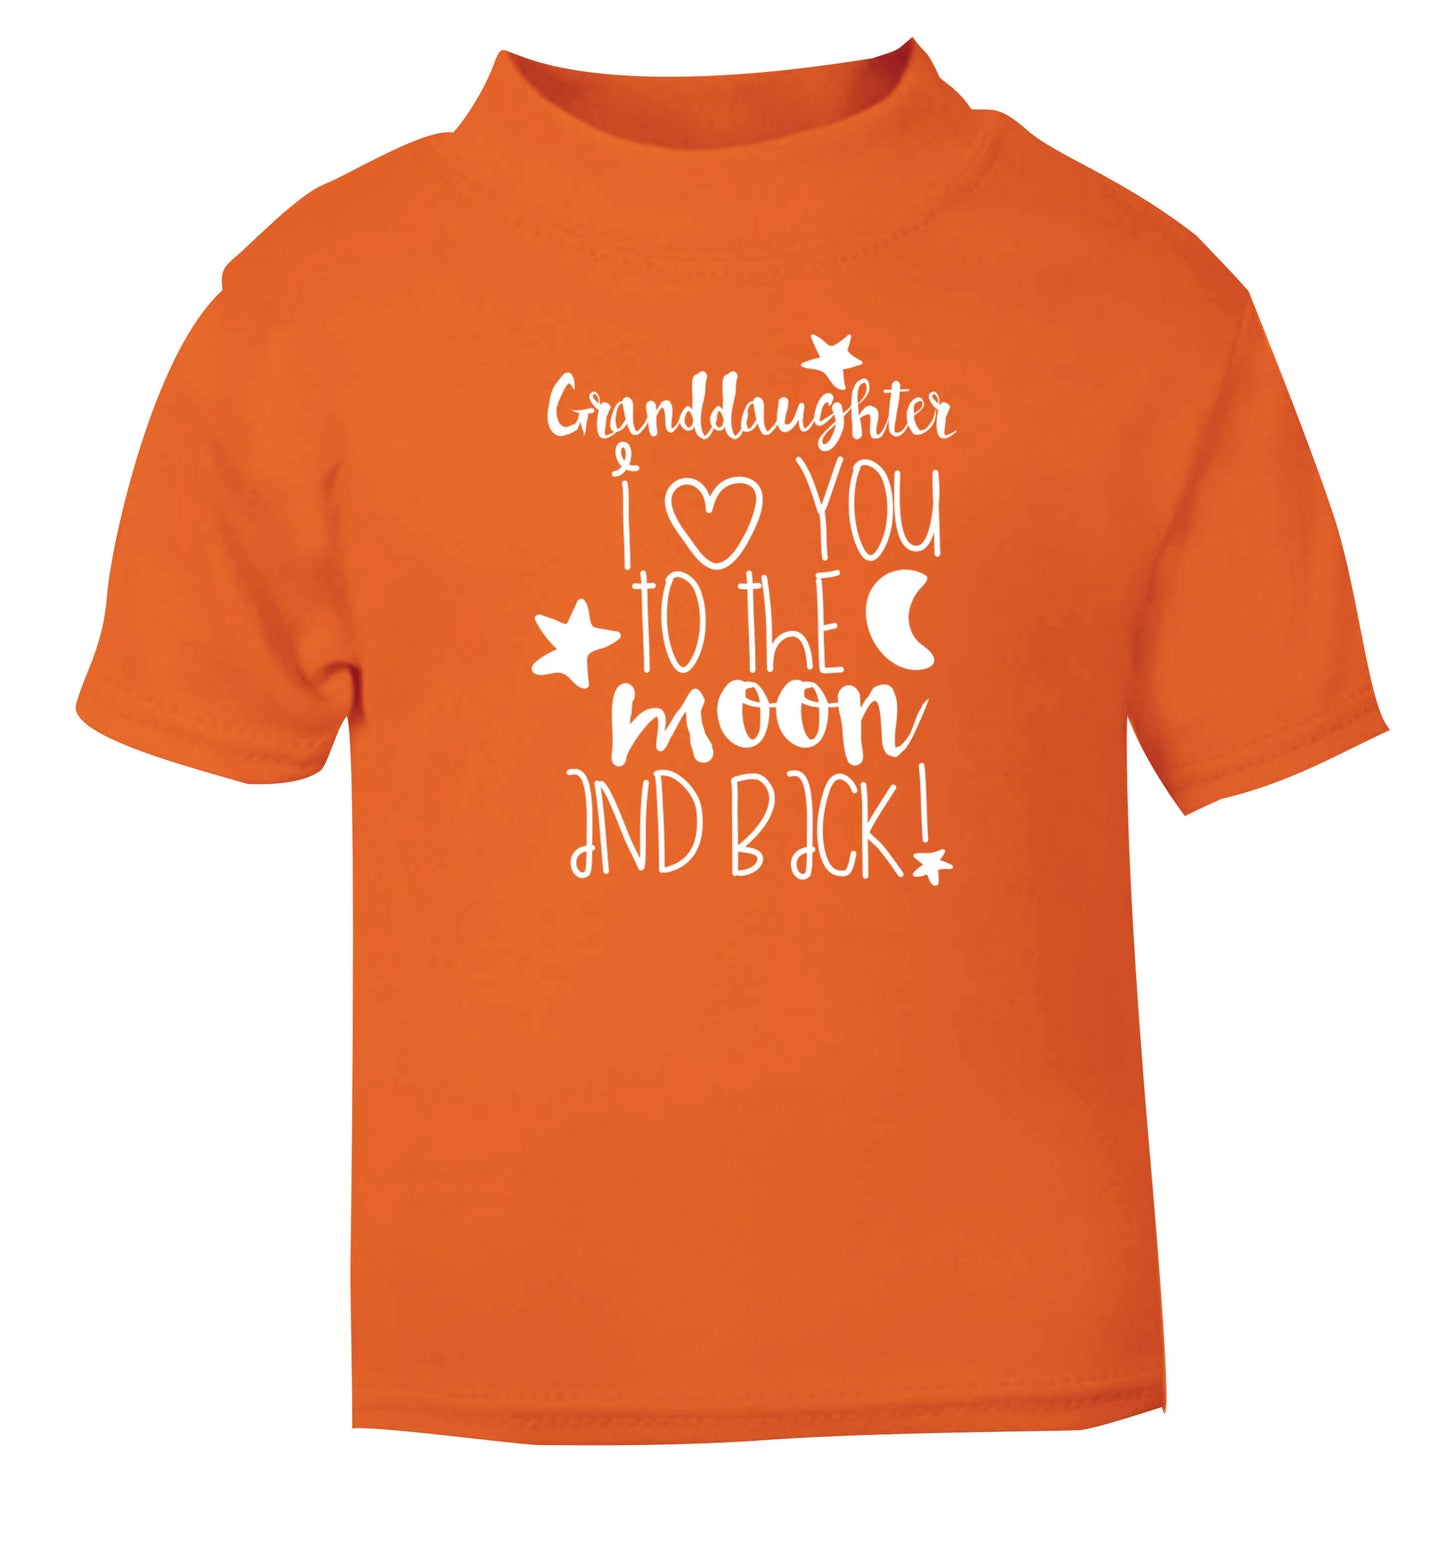 Granddaughter I love you to the moon and back orange Baby Toddler Tshirt 2 Years